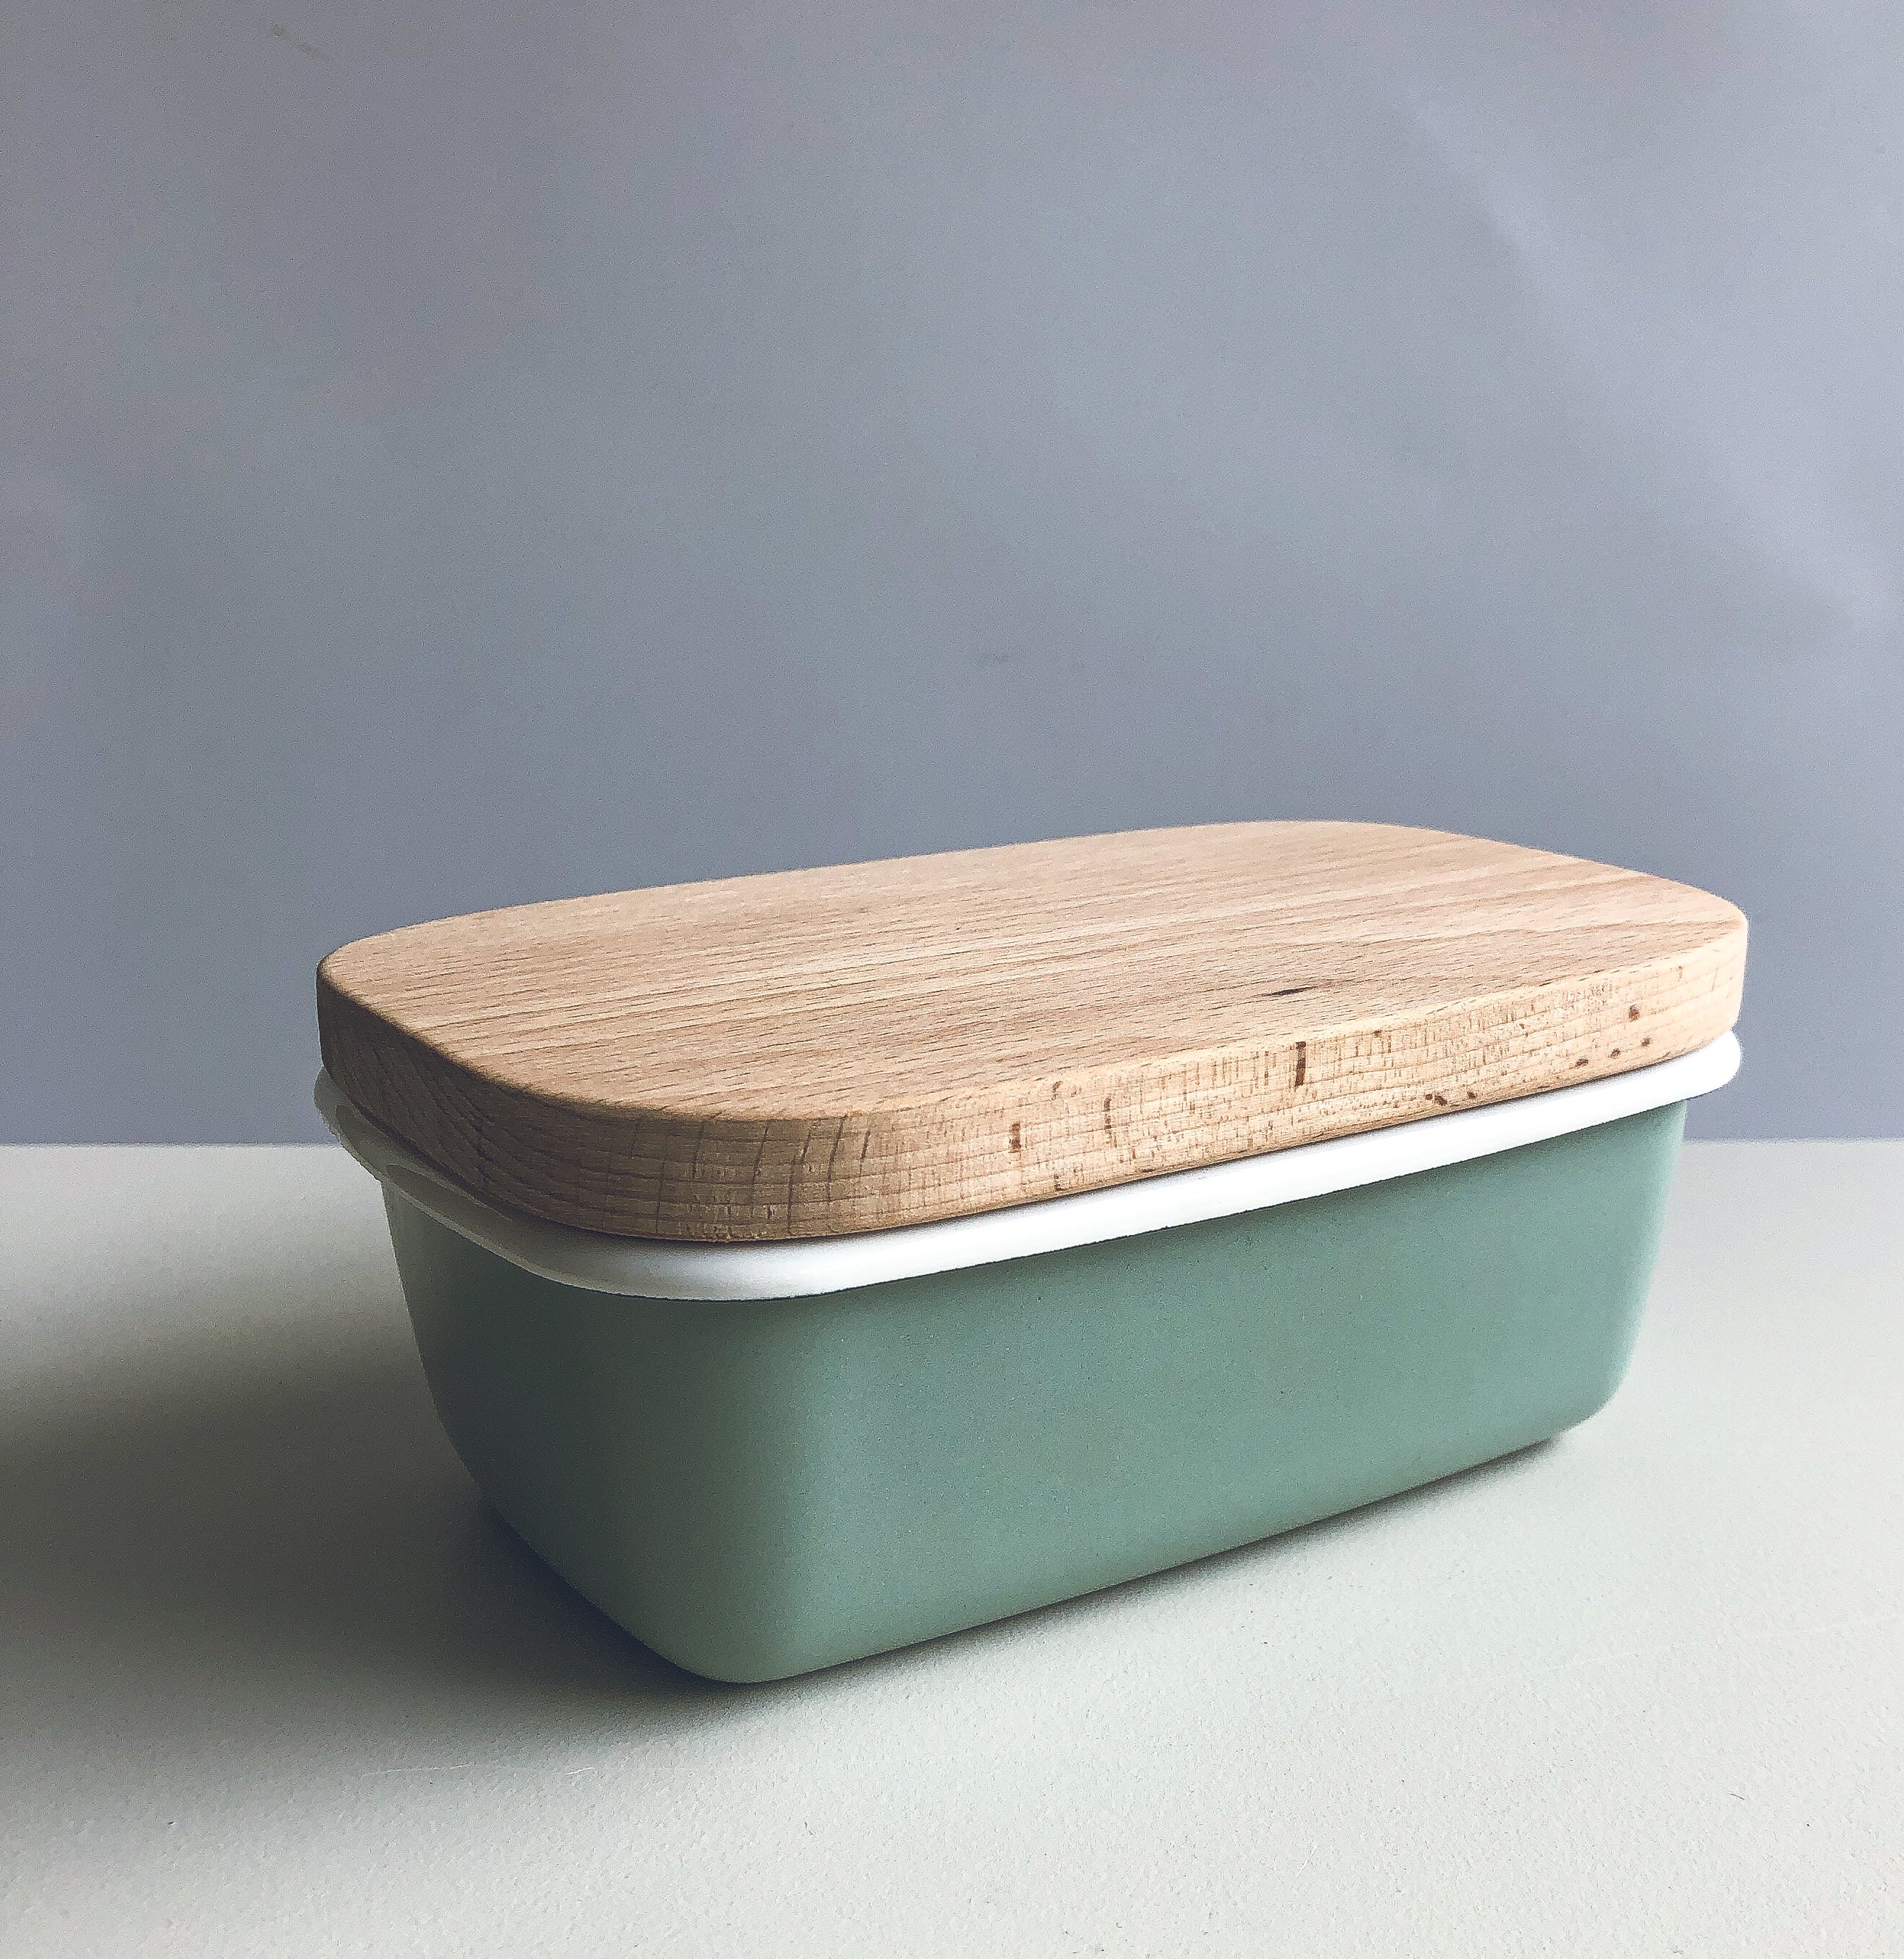 Mint Enamel Butter Dish with Wooden Lid by Garden Trading